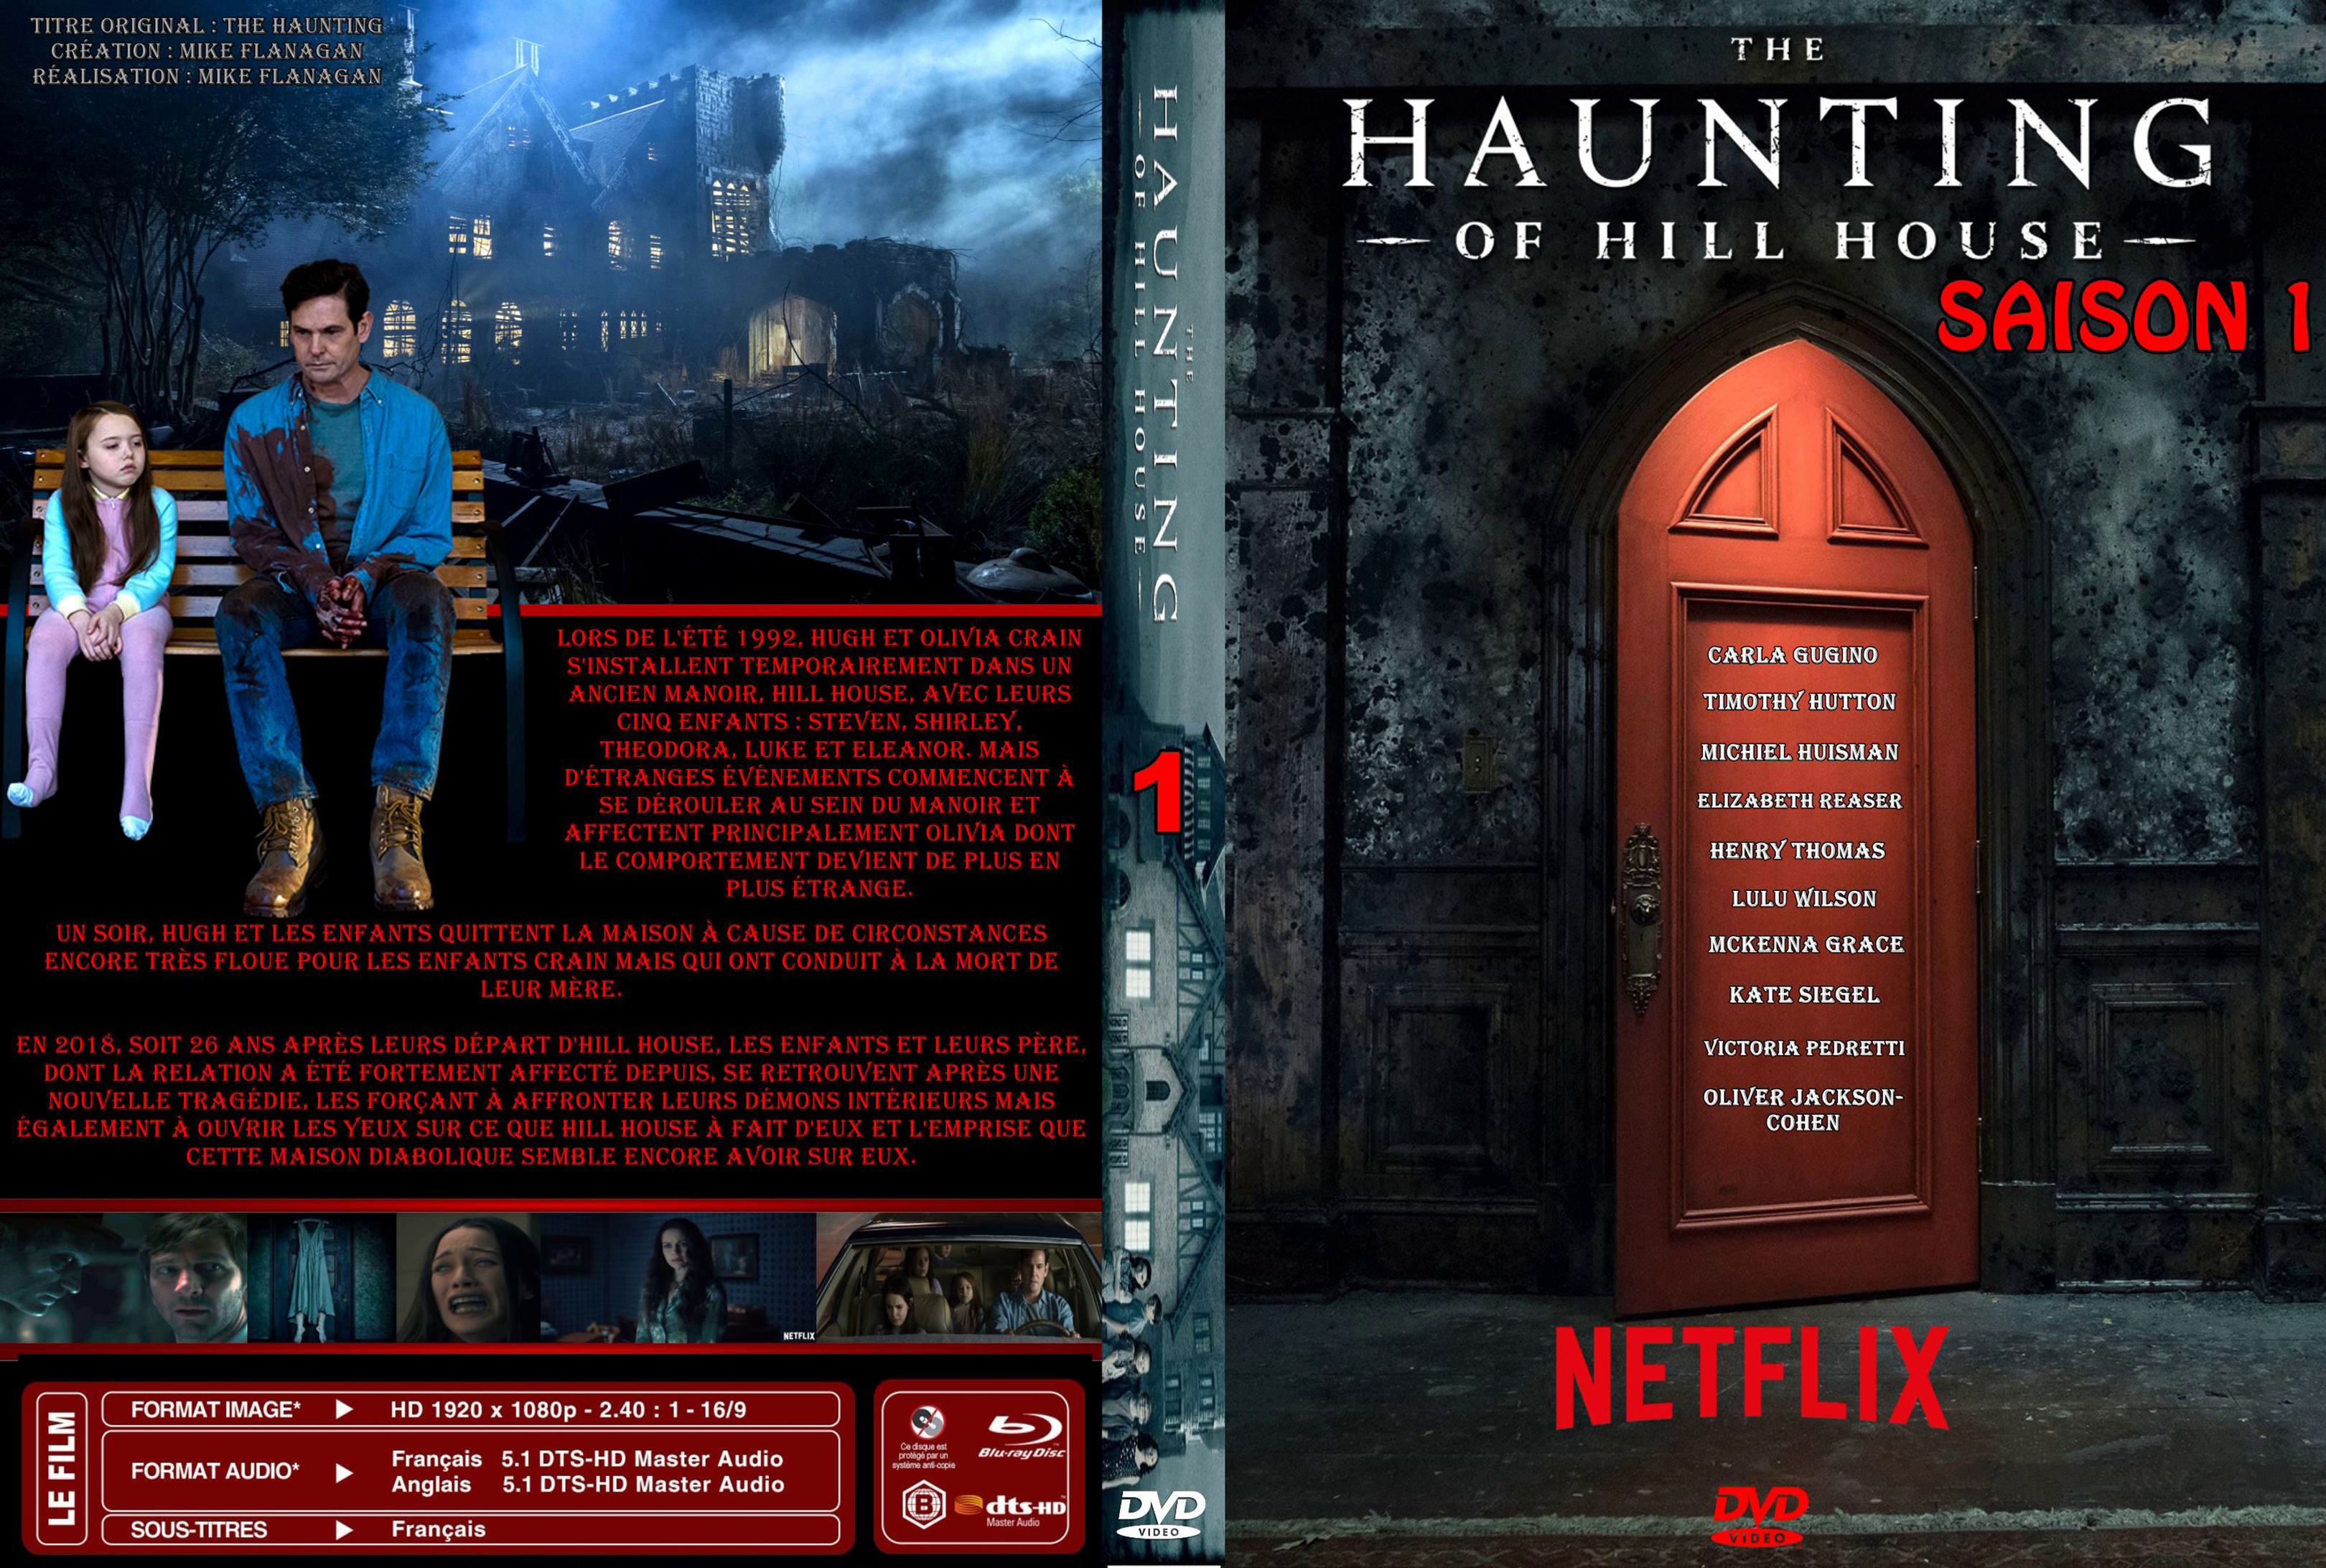 Jaquette DVD The Haunting of Hill House Saison 1 custom v2